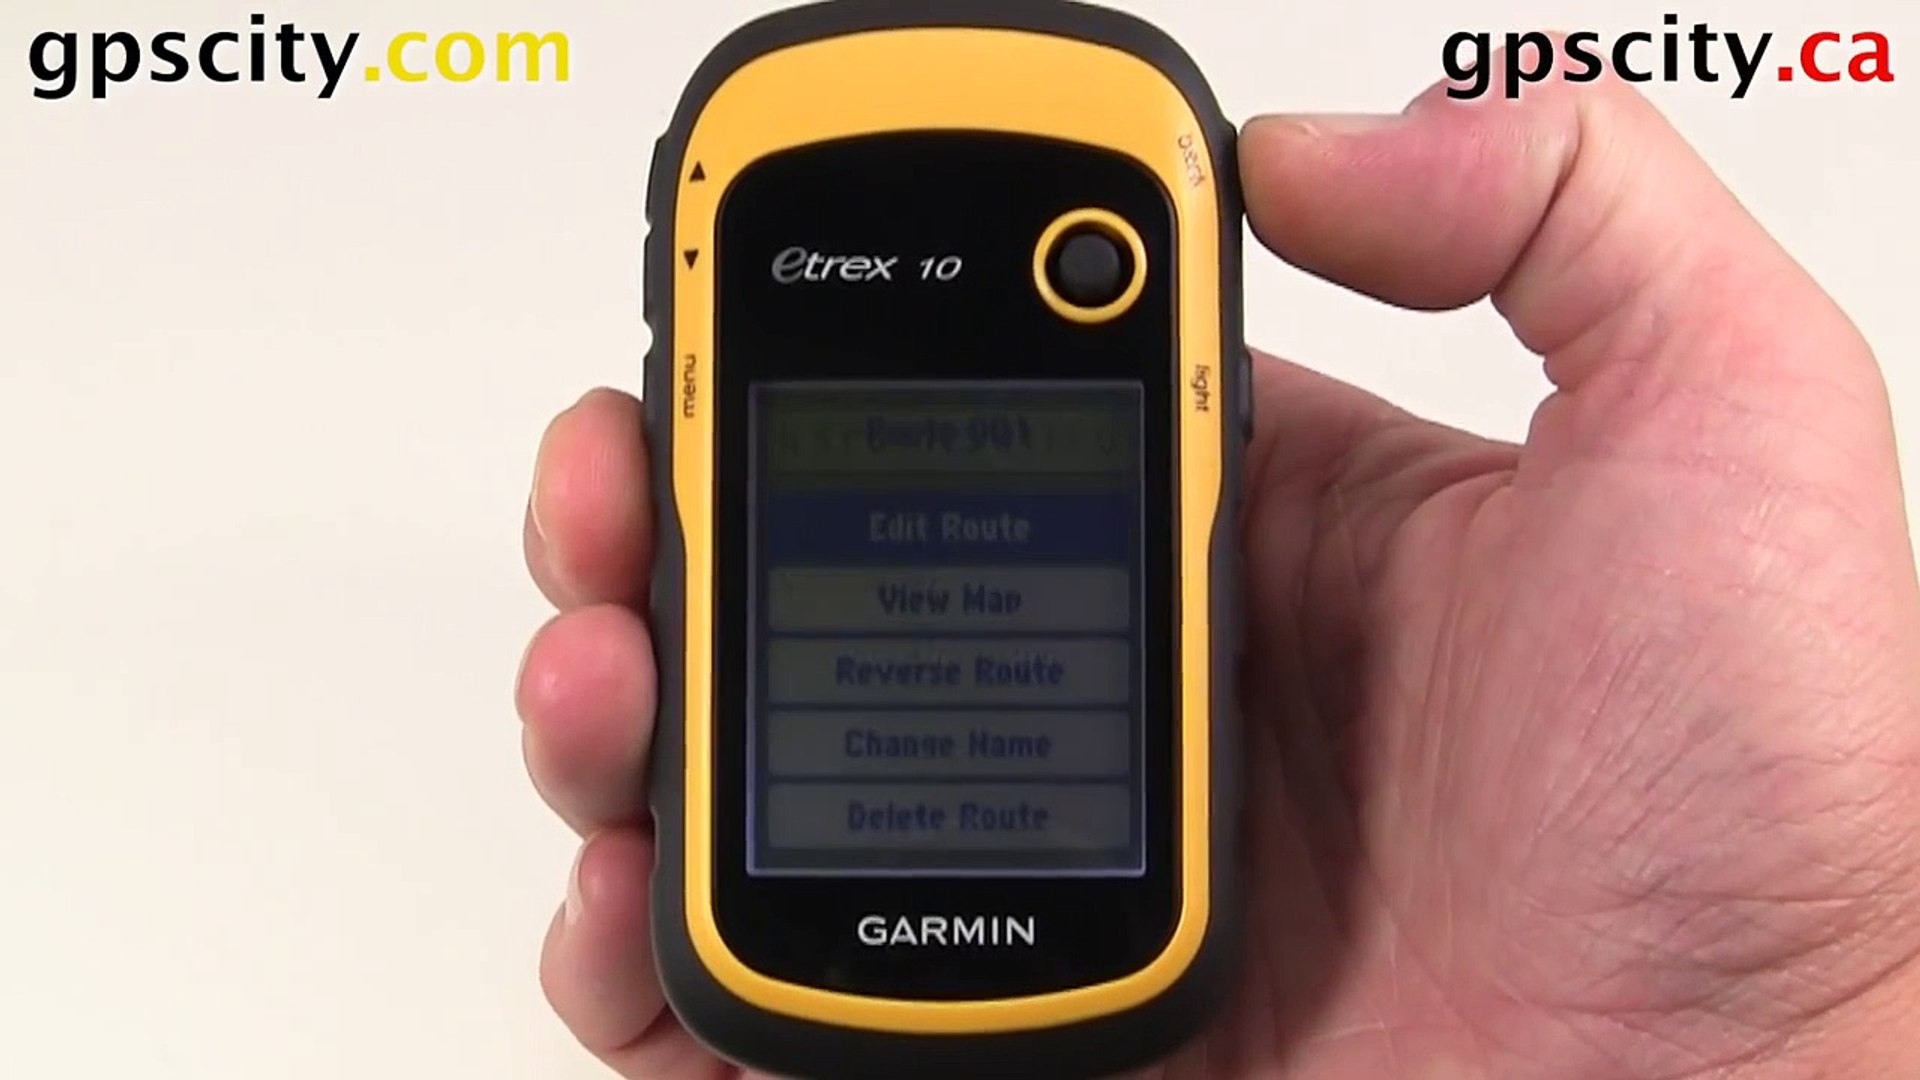 The Route Planner in the Garmin eTrex 10 with GPS City - video Dailymotion